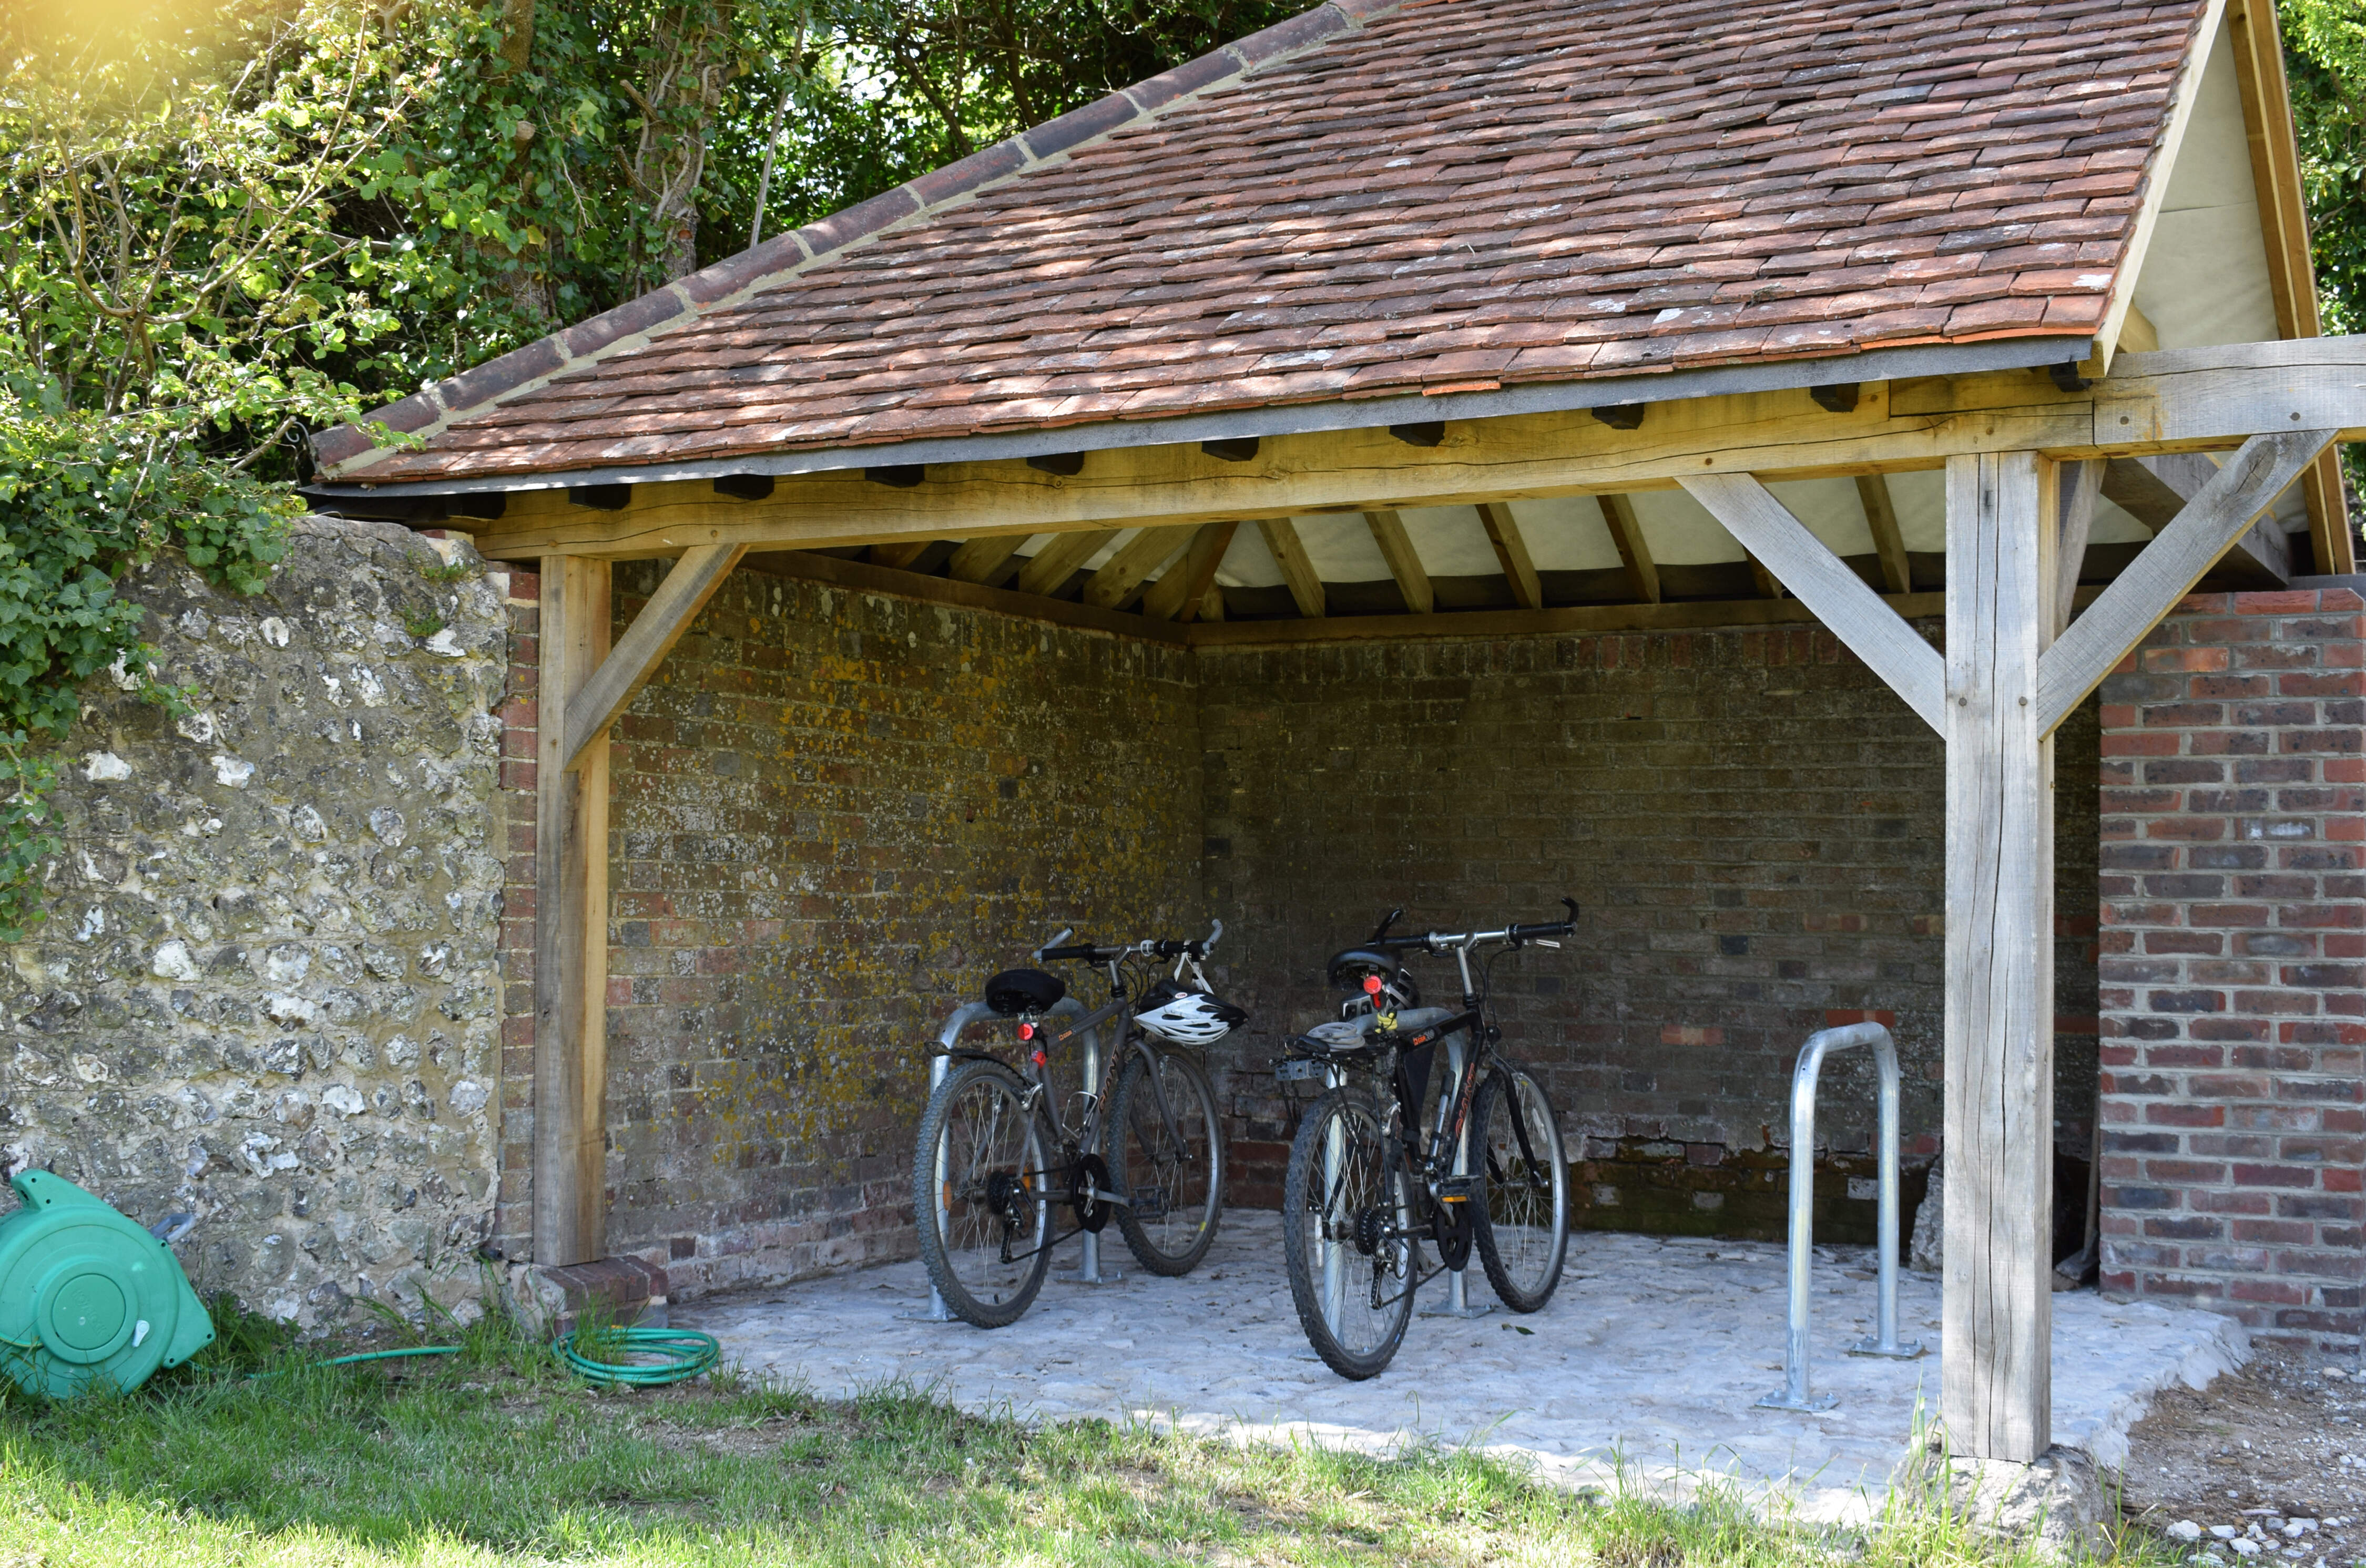 The cycle store provides secure, dry storage for cycles and equipment, and a hose for cycle cleaning